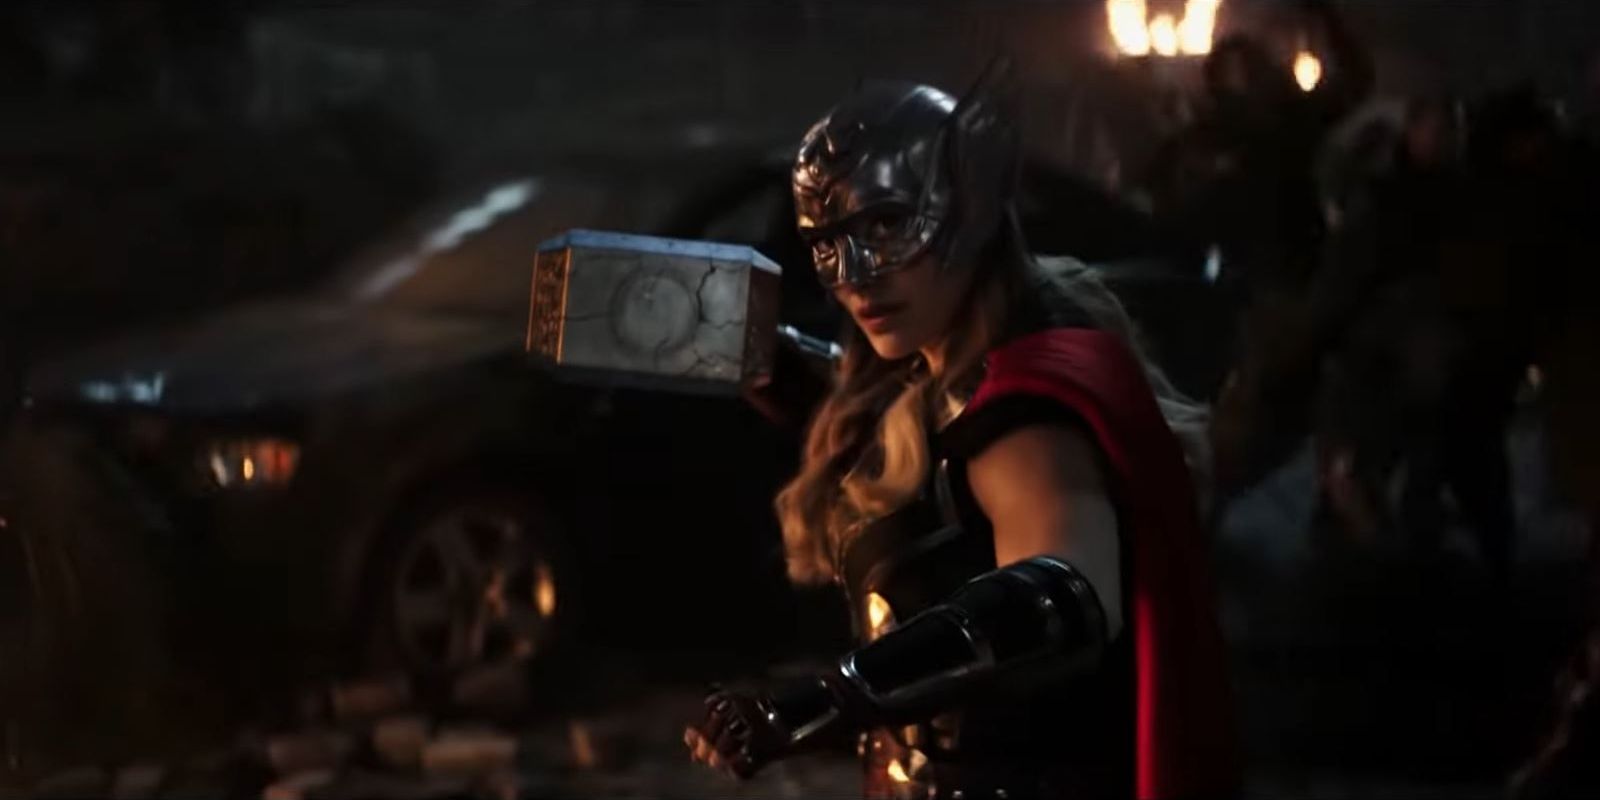 Natalie Portman as Jane Foster in the Mighty Thor armor, holding Mjolnir